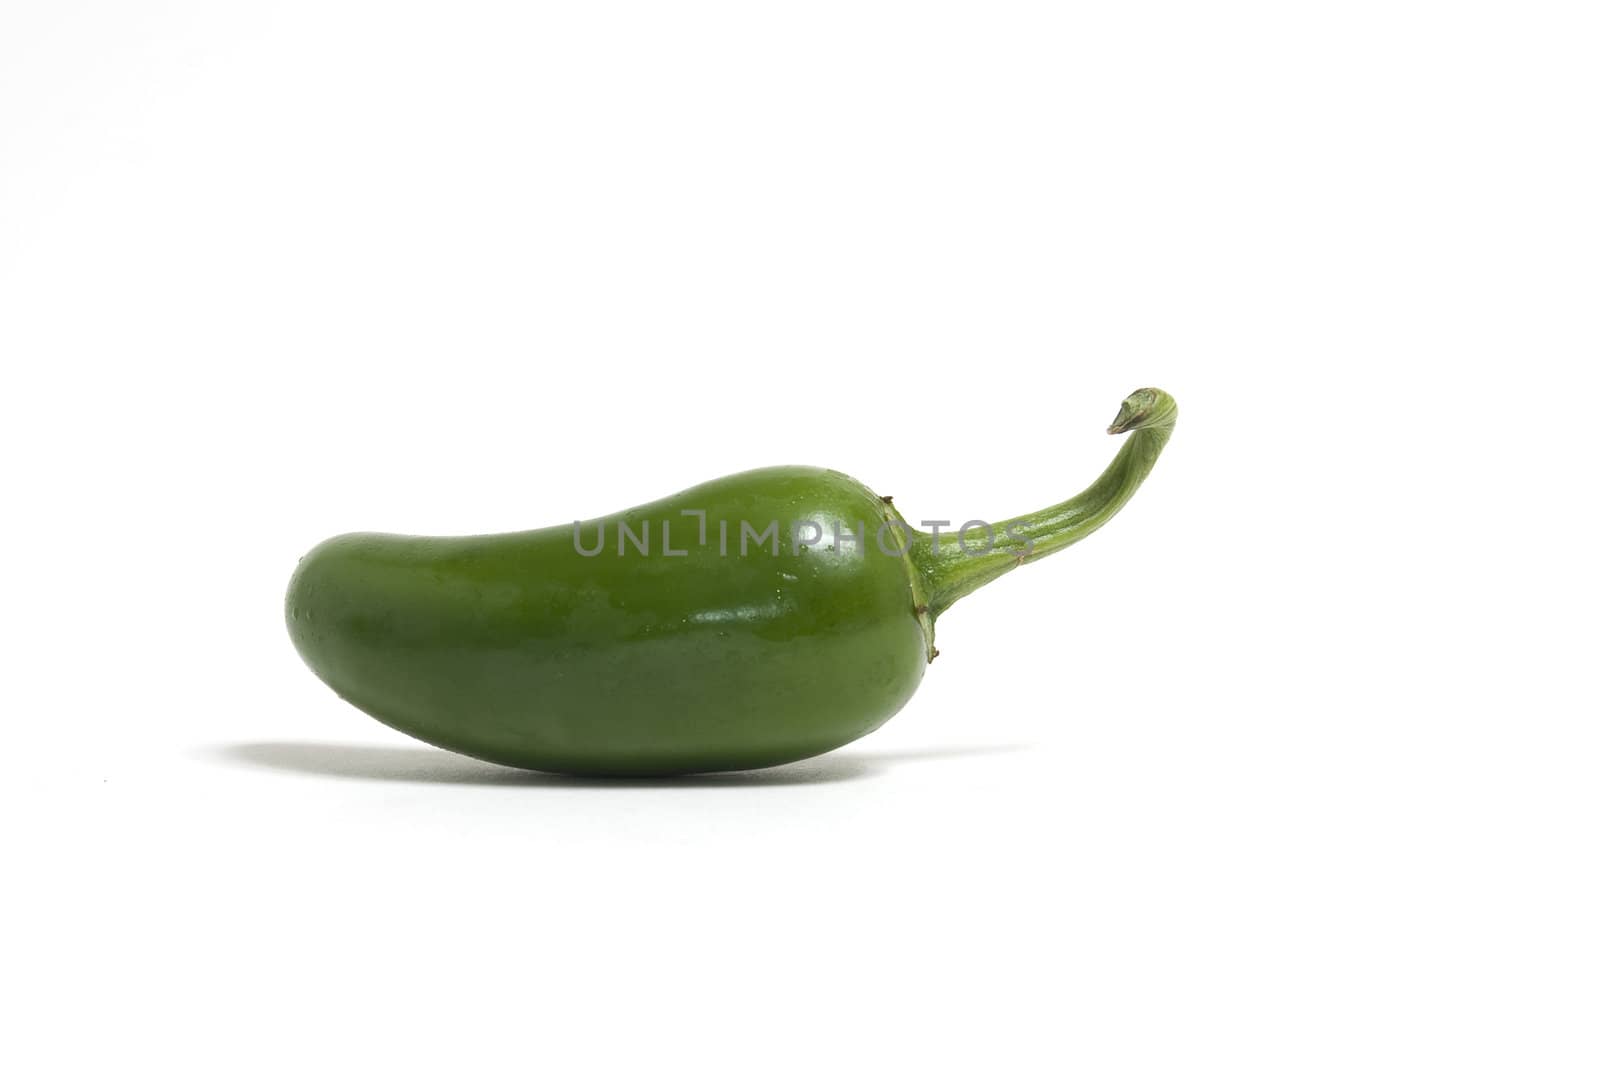 Hot green jalapeno peppers on white background